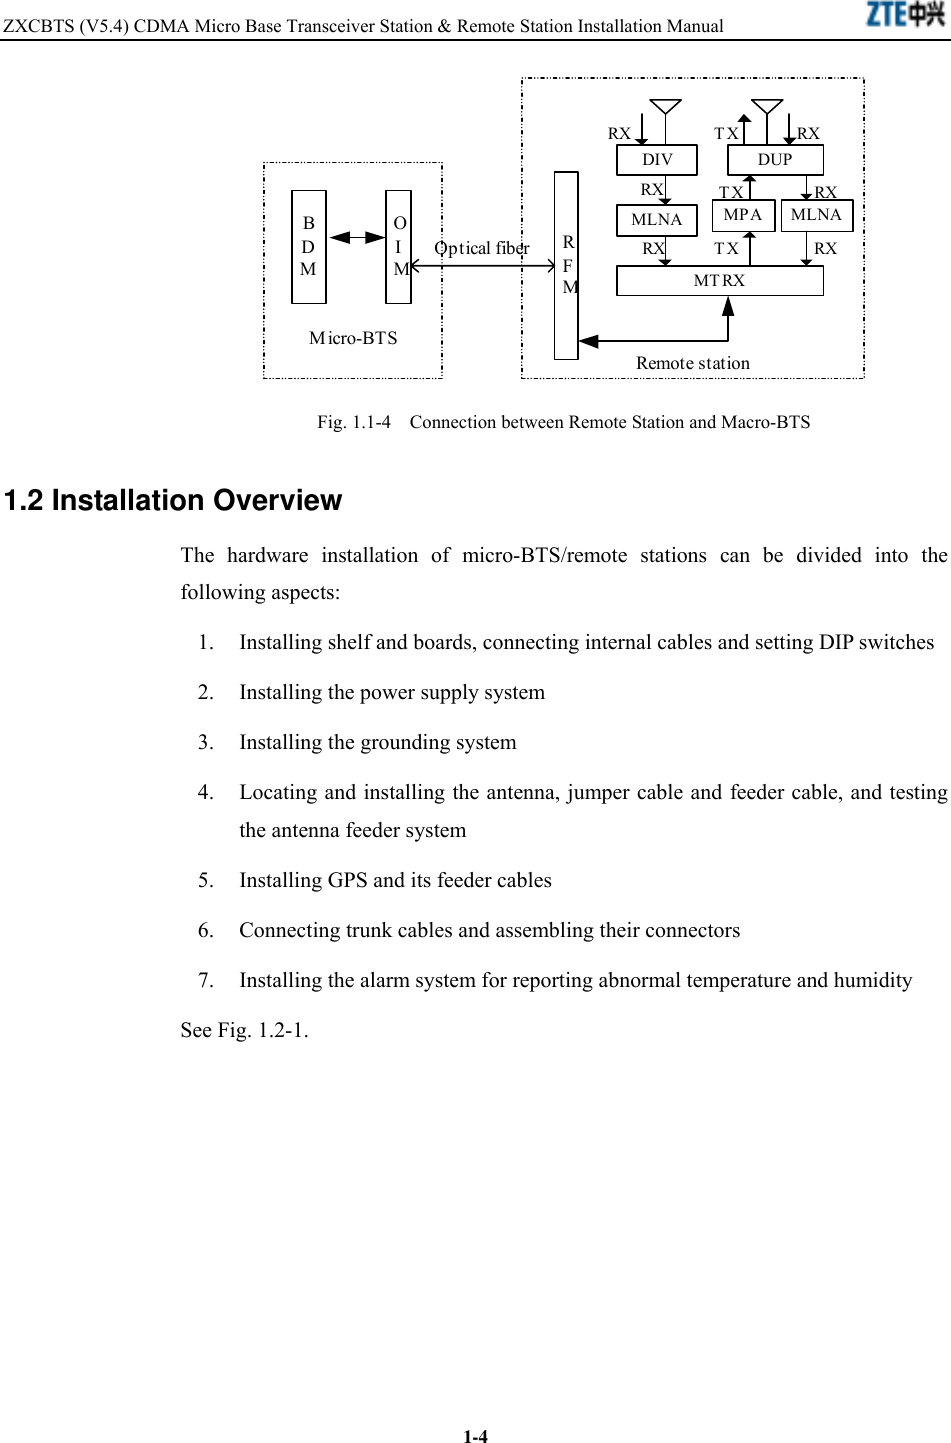 ZXCBTS (V5.4) CDMA Micro Base Transceiver Station &amp; Remote Station Installation Manual    1-4Remote stationRFMDIV DUPMLNA MLNAMTRXRX RXTXTXRXRX RXMicro-BTSOIMBDMMPARXTXOptical fiber Fig. 1.1-4  Connection between Remote Station and Macro-BTS 1.2 Installation Overview The hardware installation of micro-BTS/remote stations can be divided into the following aspects: 1.  Installing shelf and boards, connecting internal cables and setting DIP switches 2.  Installing the power supply system 3.  Installing the grounding system 4.  Locating and installing the antenna, jumper cable and feeder cable, and testing the antenna feeder system 5.  Installing GPS and its feeder cables 6.  Connecting trunk cables and assembling their connectors 7.  Installing the alarm system for reporting abnormal temperature and humidity See Fig. 1.2-1. 